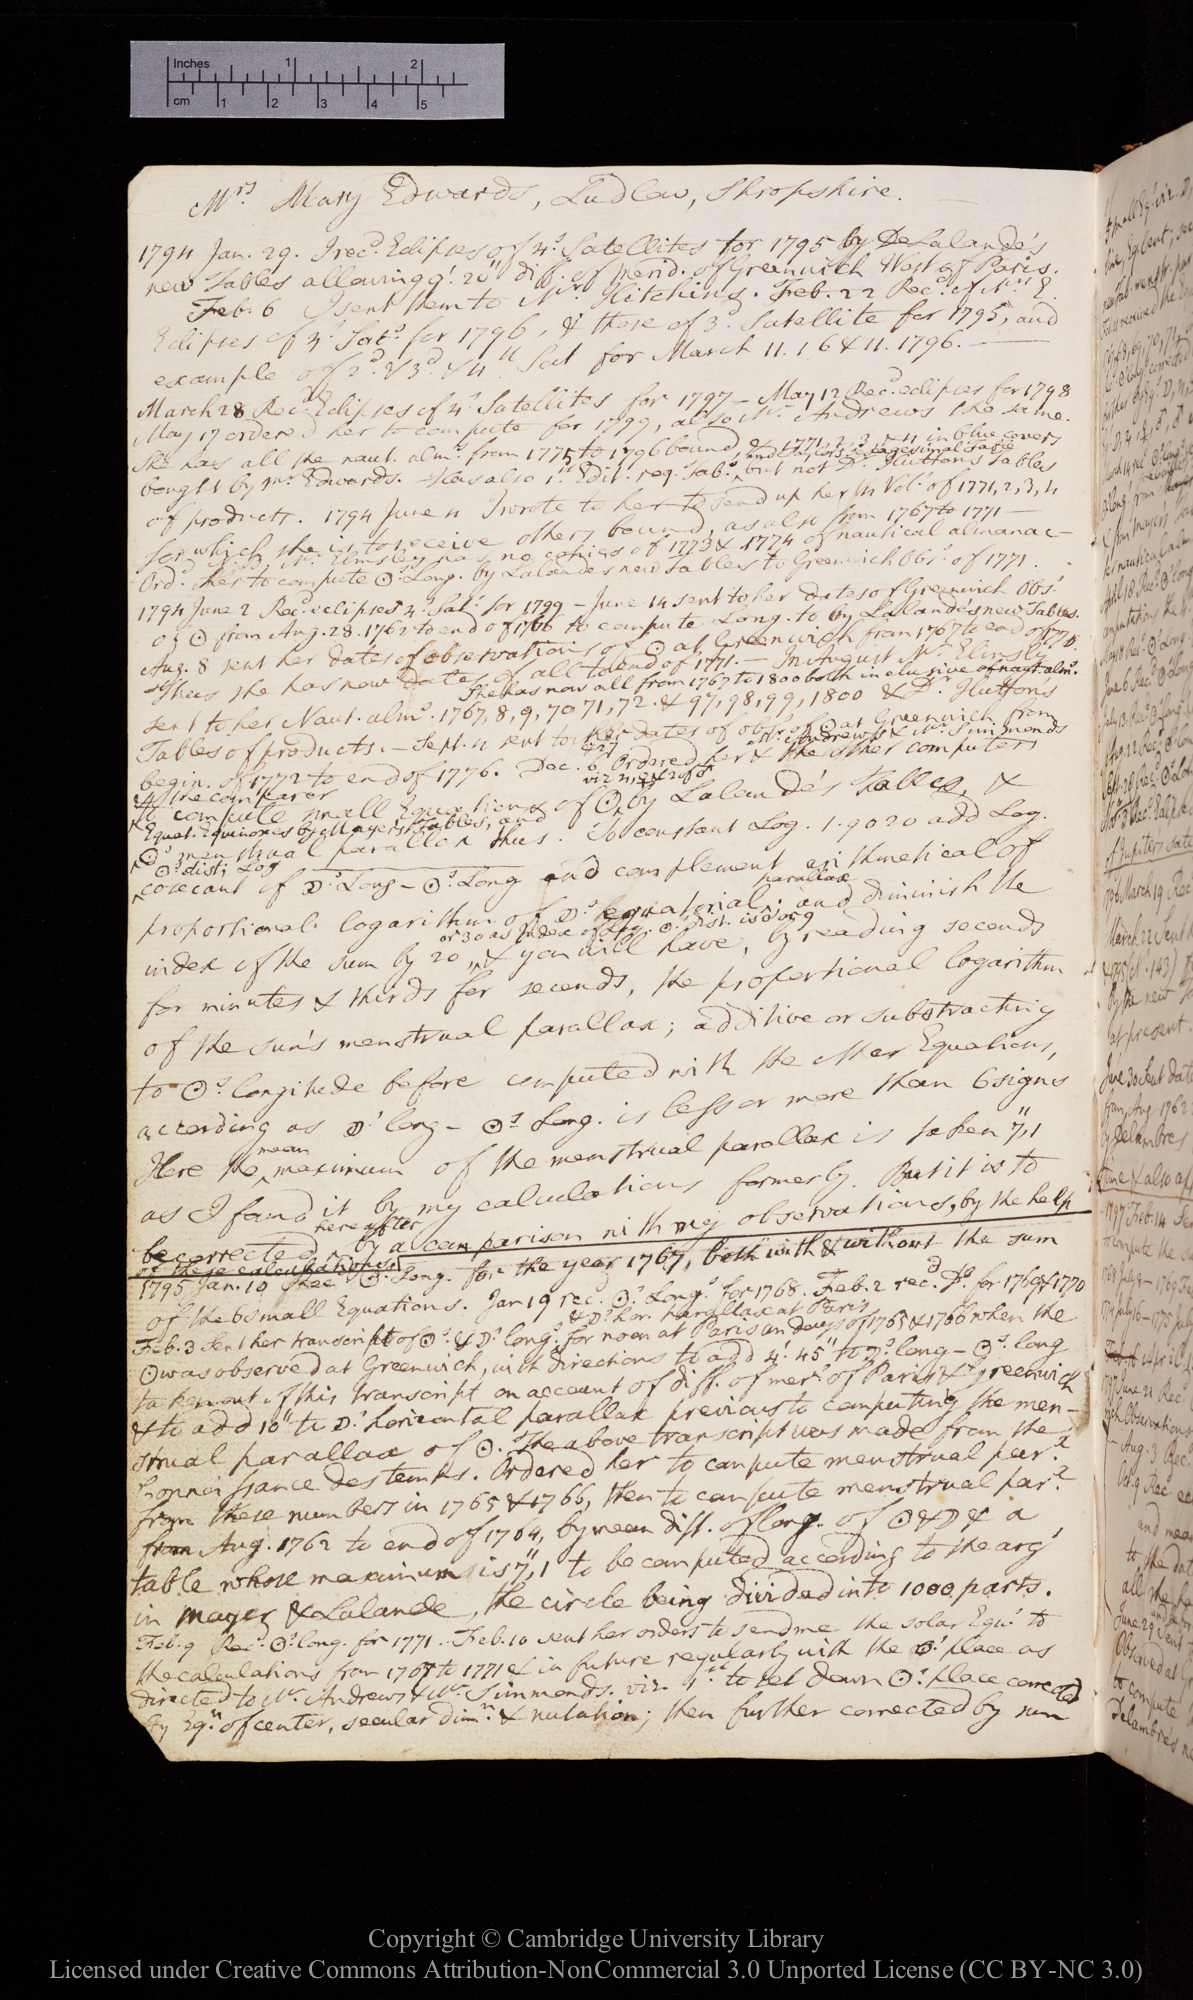 Diary of tasks for Mrs Mary Edwards of Ludlow, Shropshire, to compute